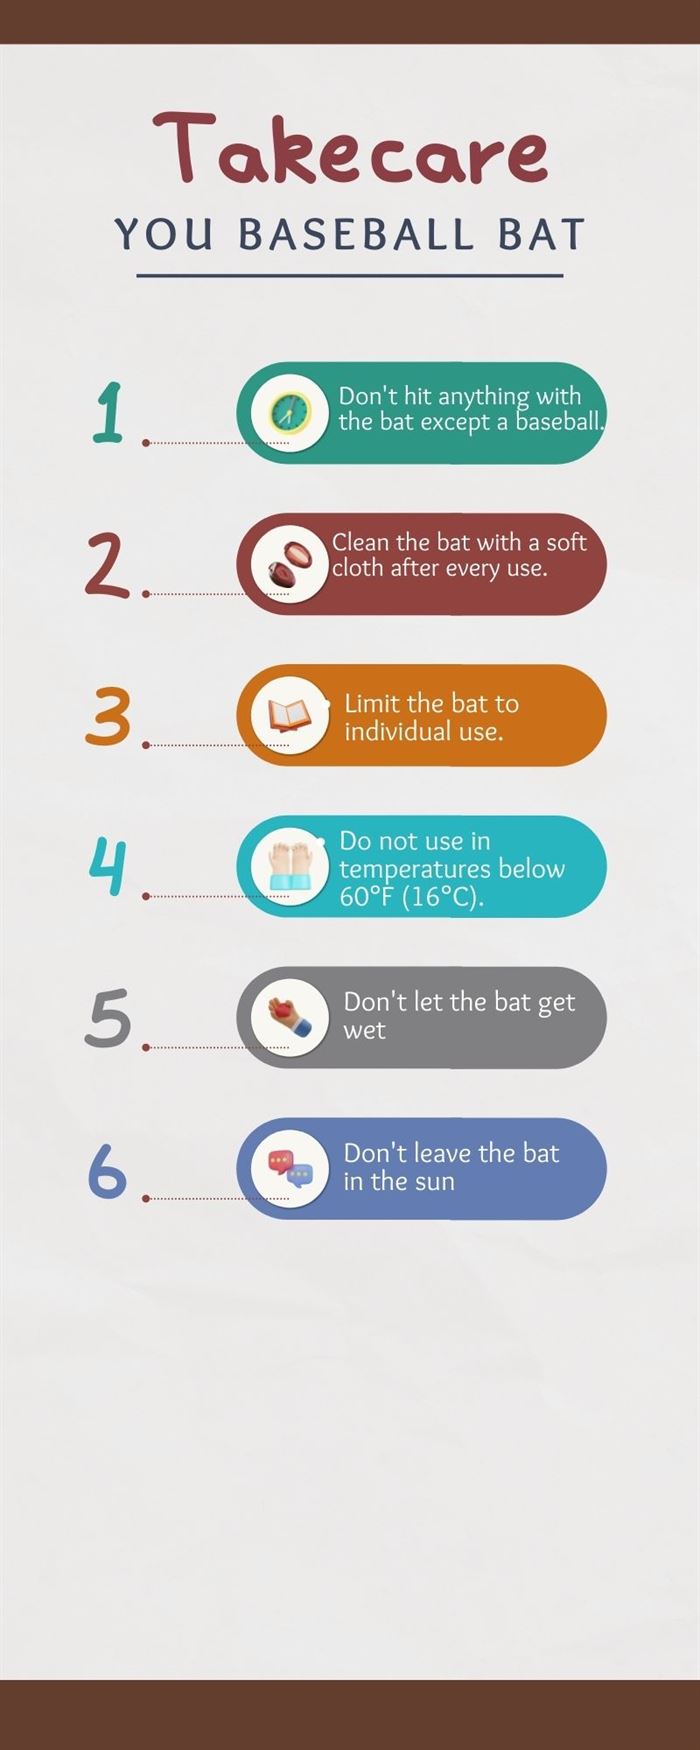 Take care of your bat